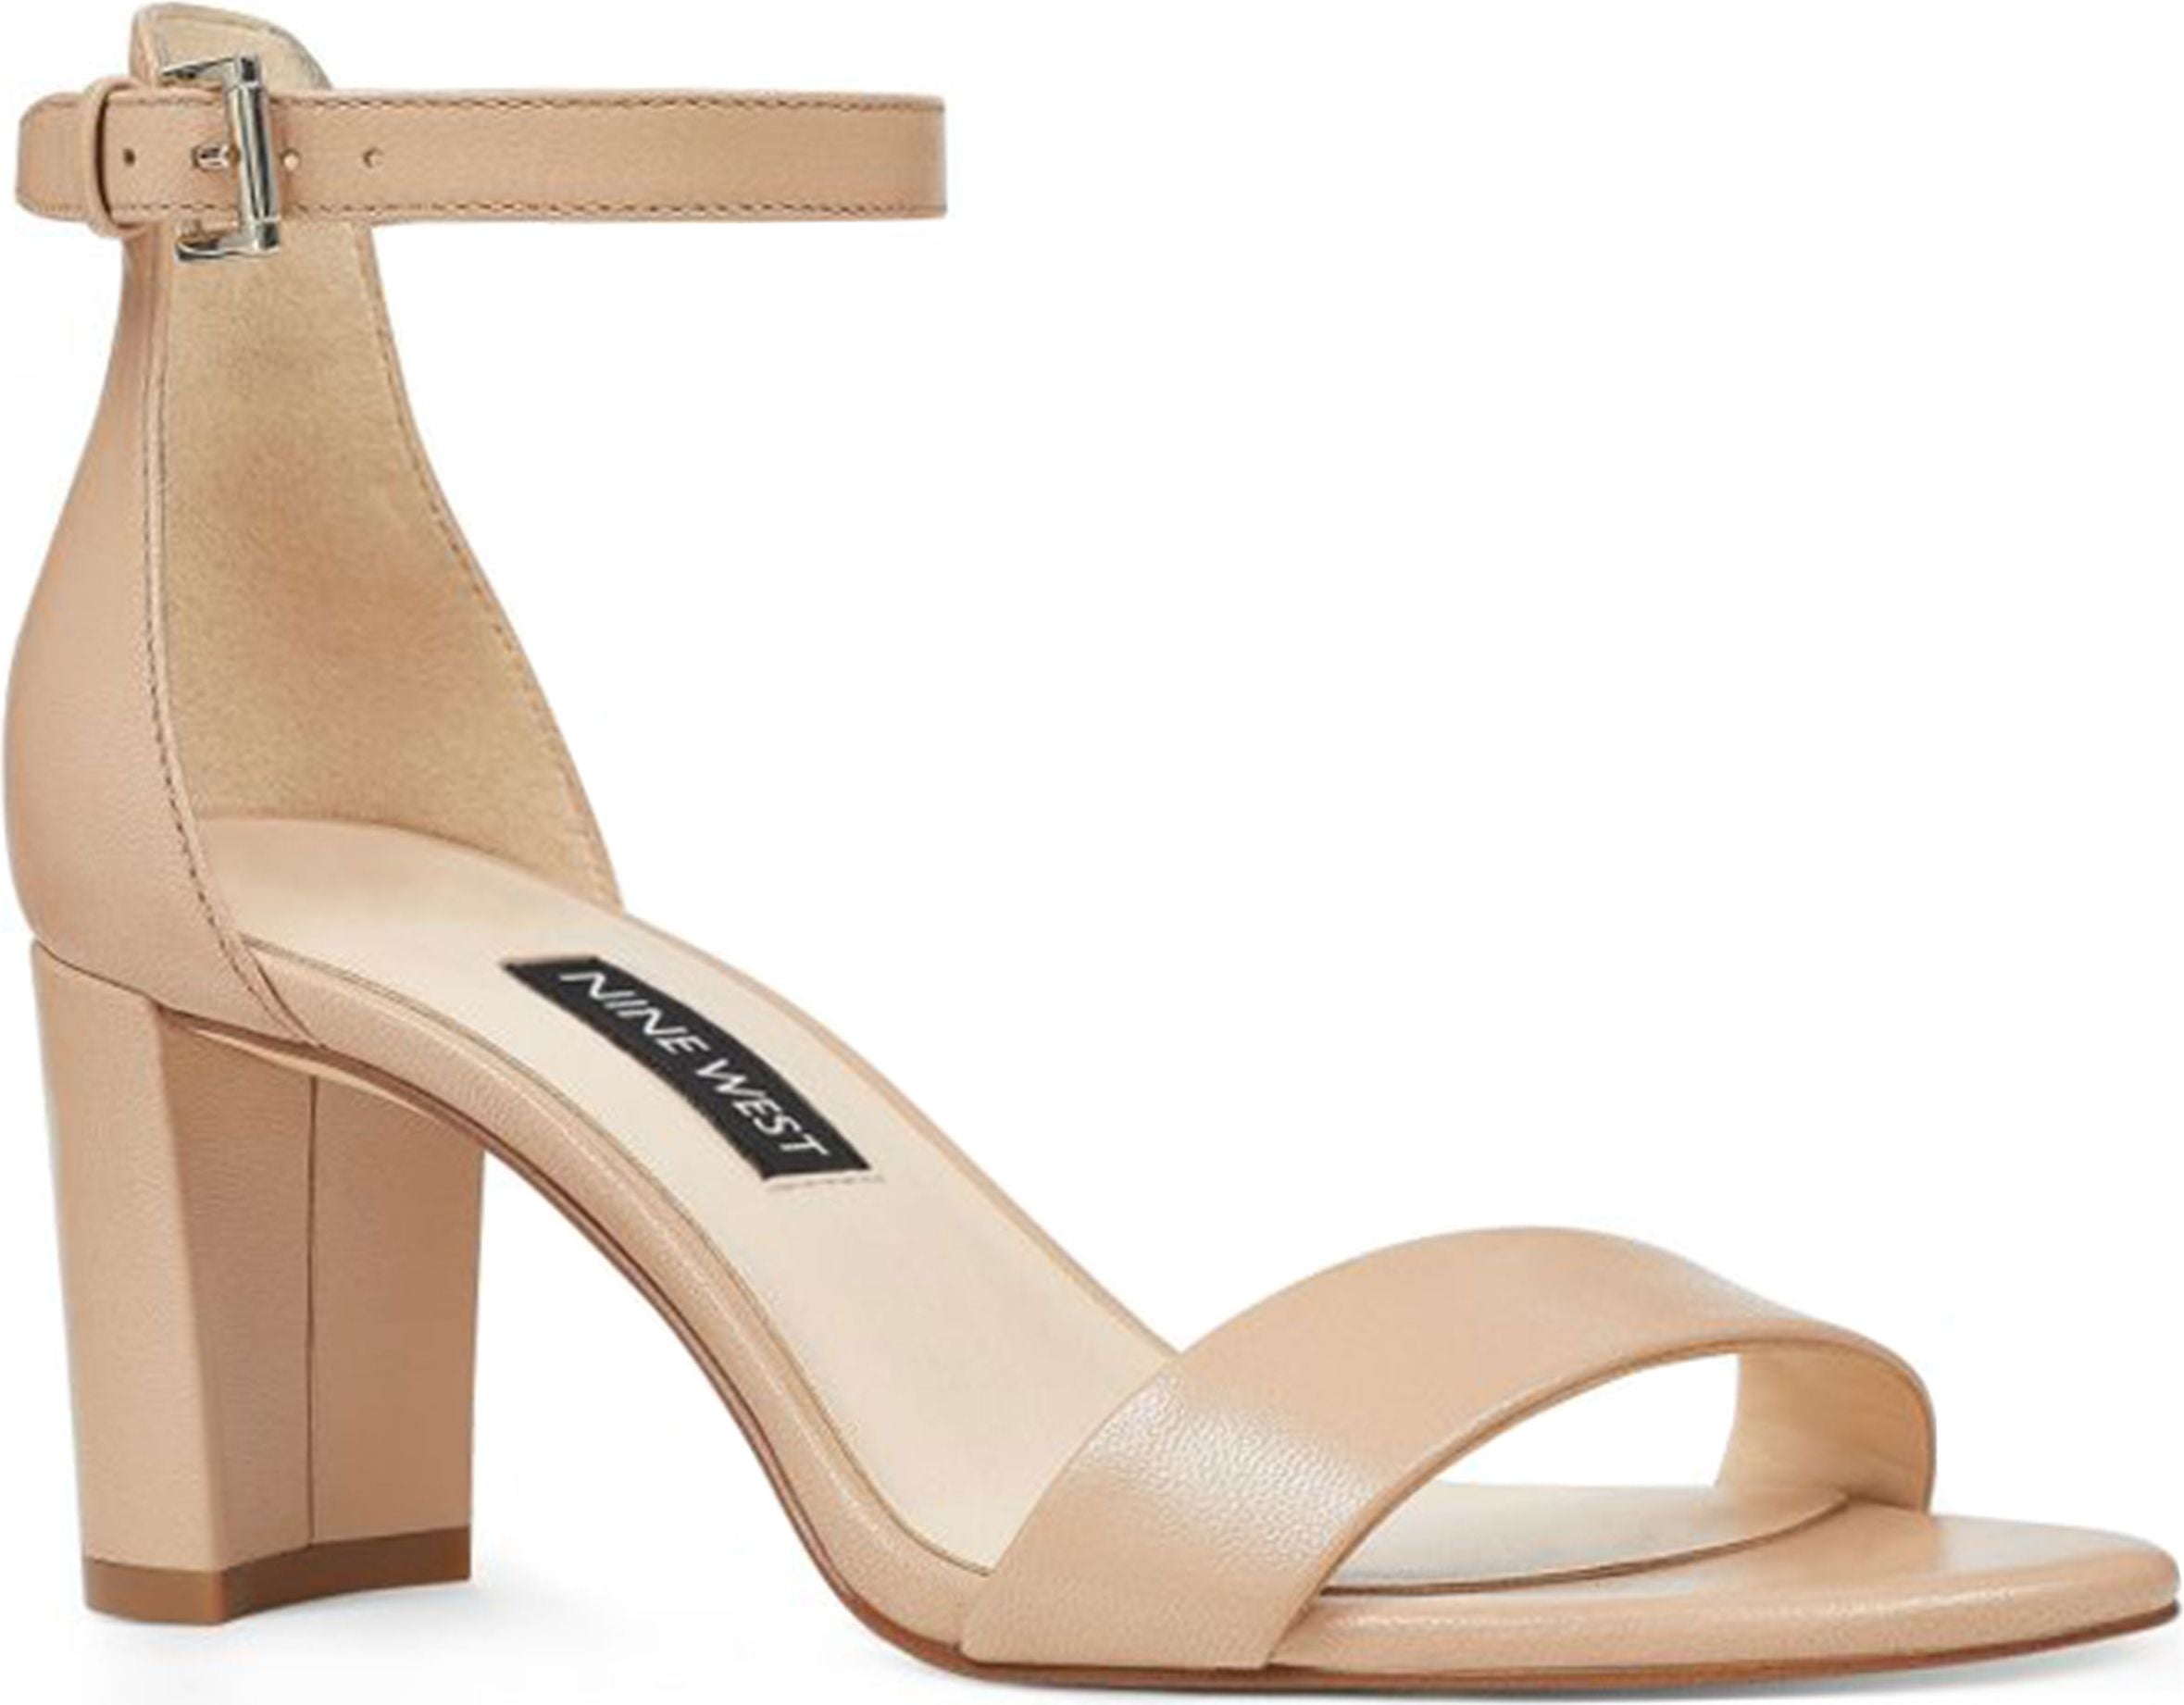 Pruce Barely Nude Ankle Strap Sandal